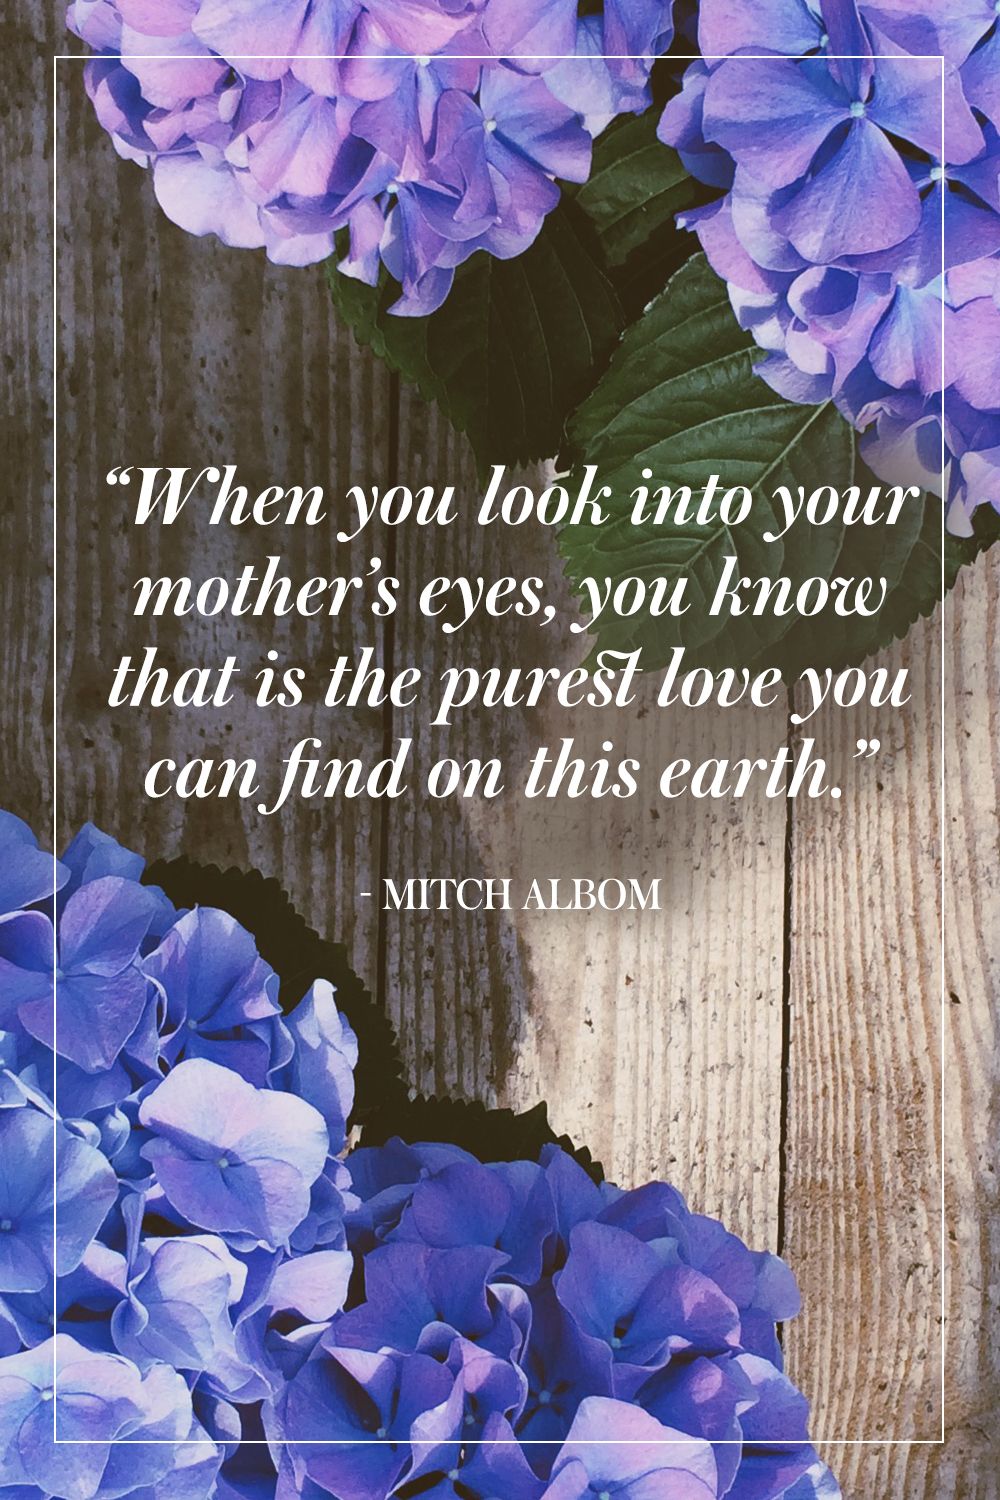 21-best-mother-s-day-quotes-beautiful-mom-sayings-for-mothers-day-2018